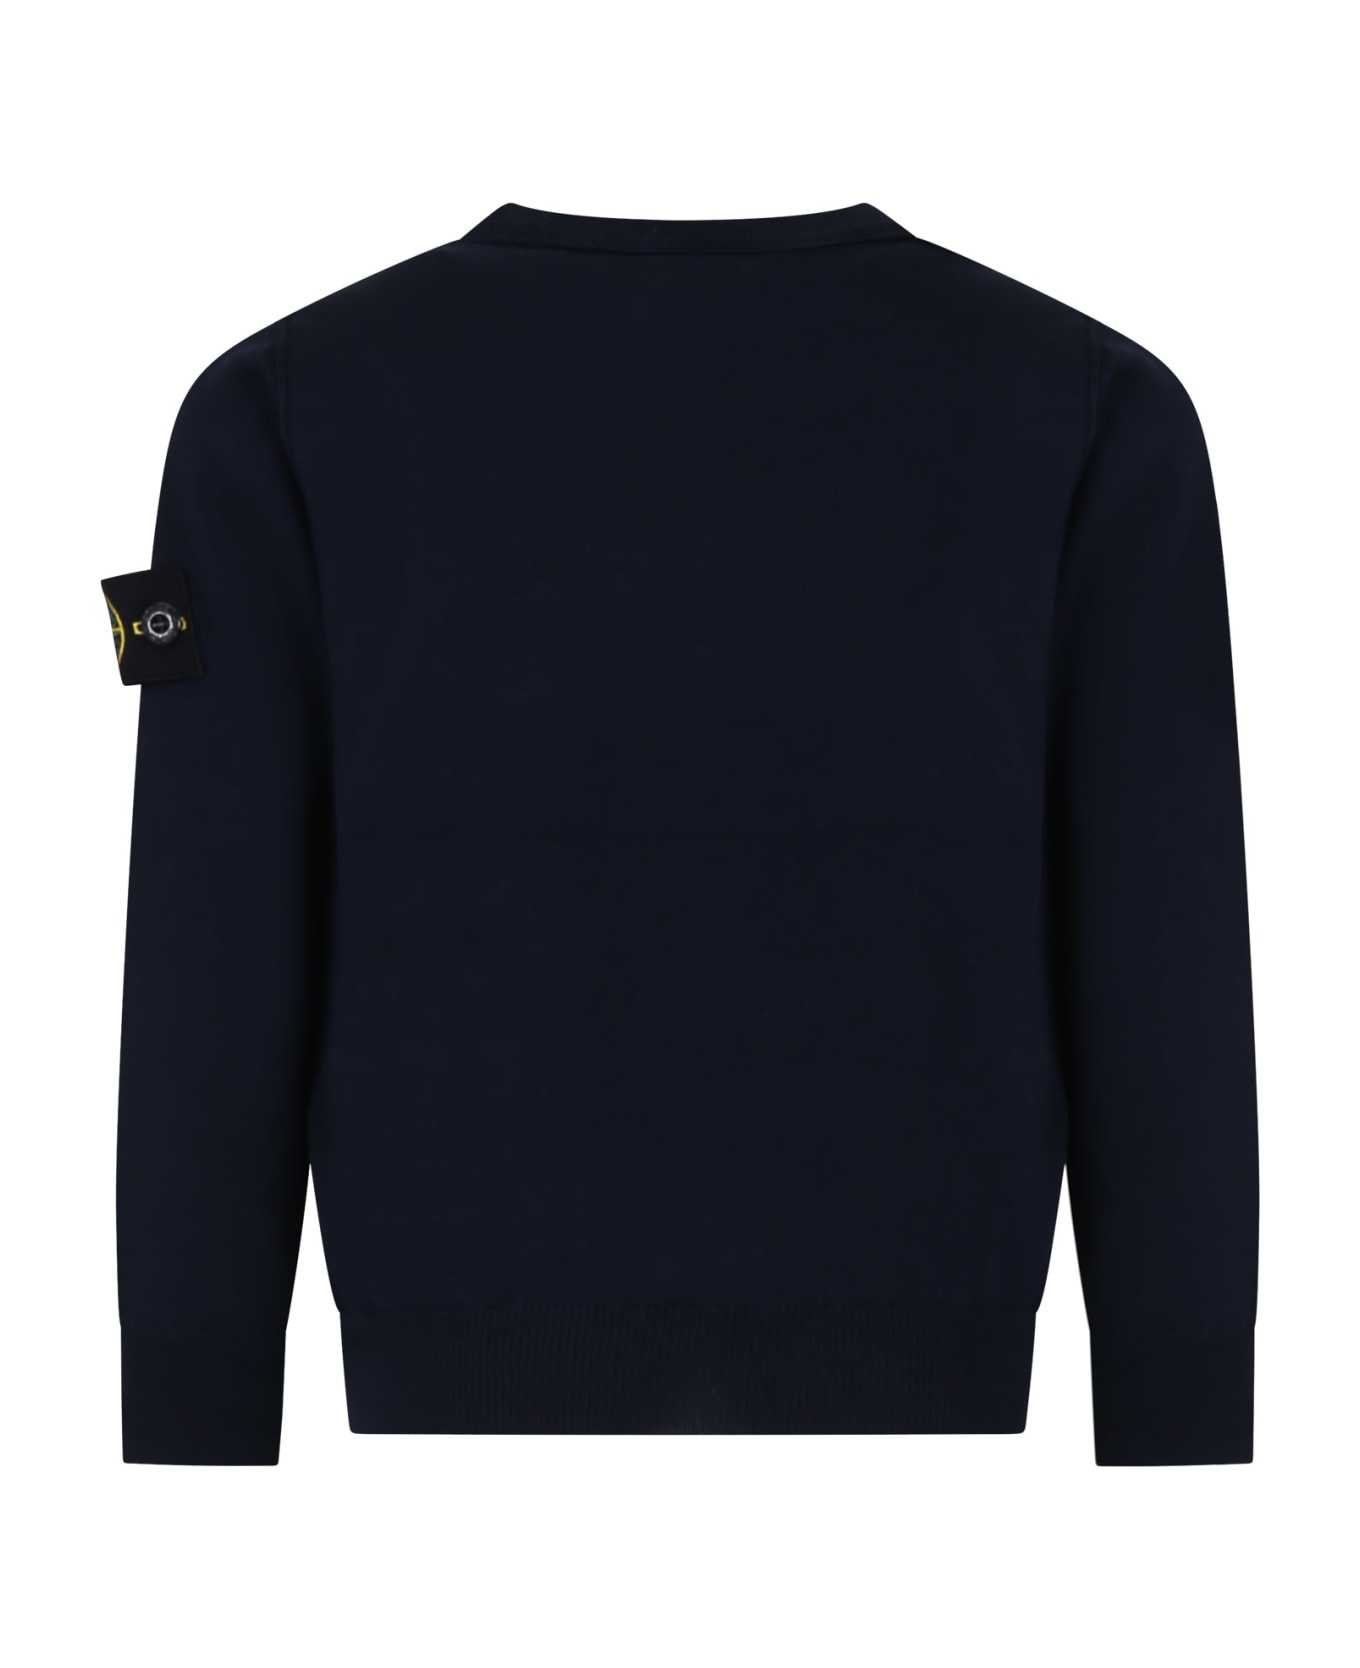 Stone Island Junior Blue Sweater For Baby Boy With Compass